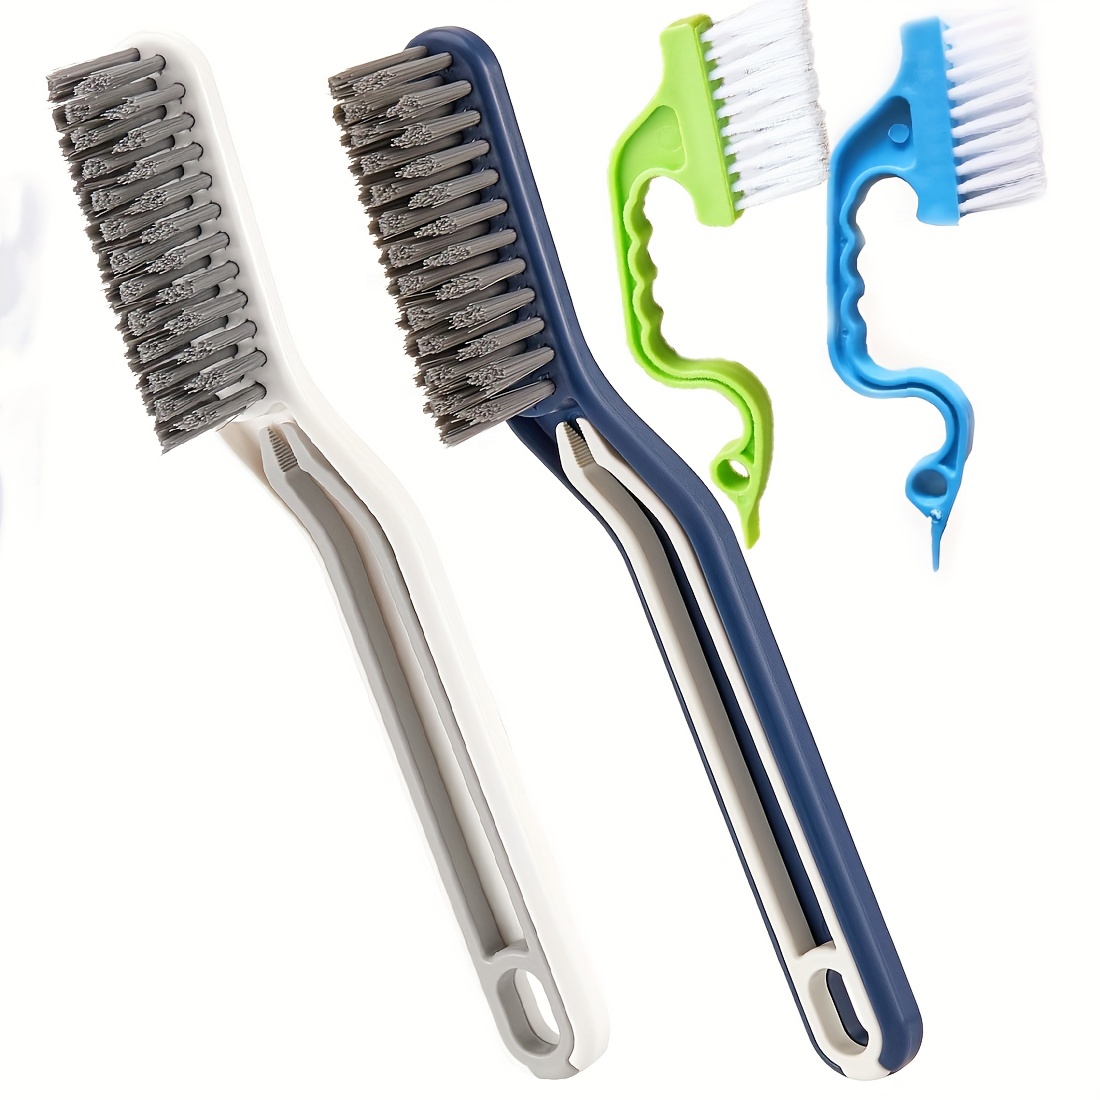 Multifunctional Gap Cleaning Brushes Set Kitchen Bathroom Groove